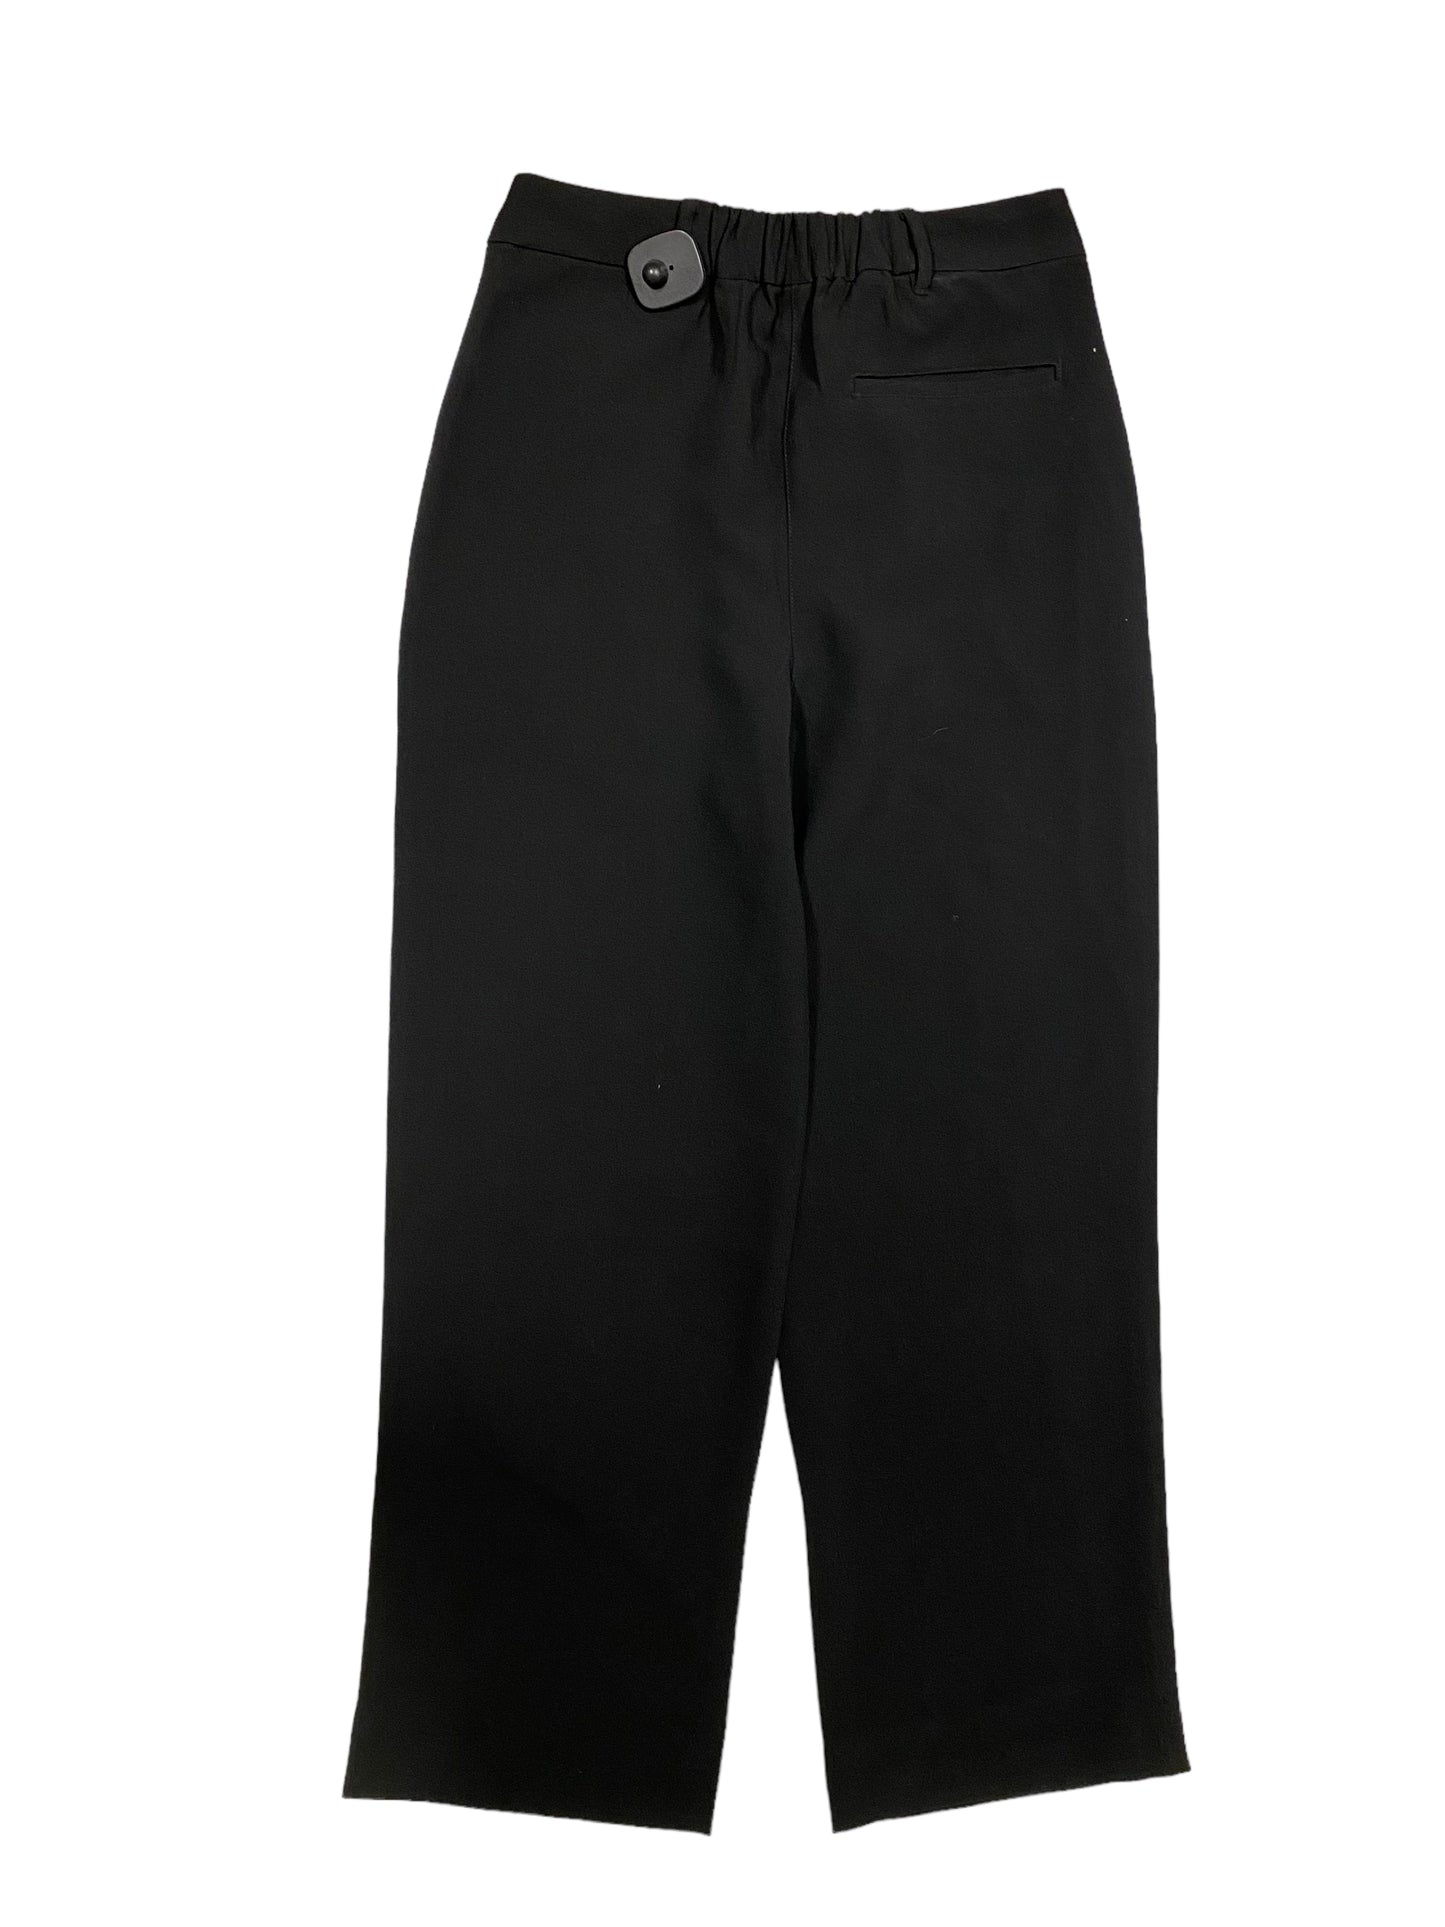 Black Pants Other Old Navy, Size M